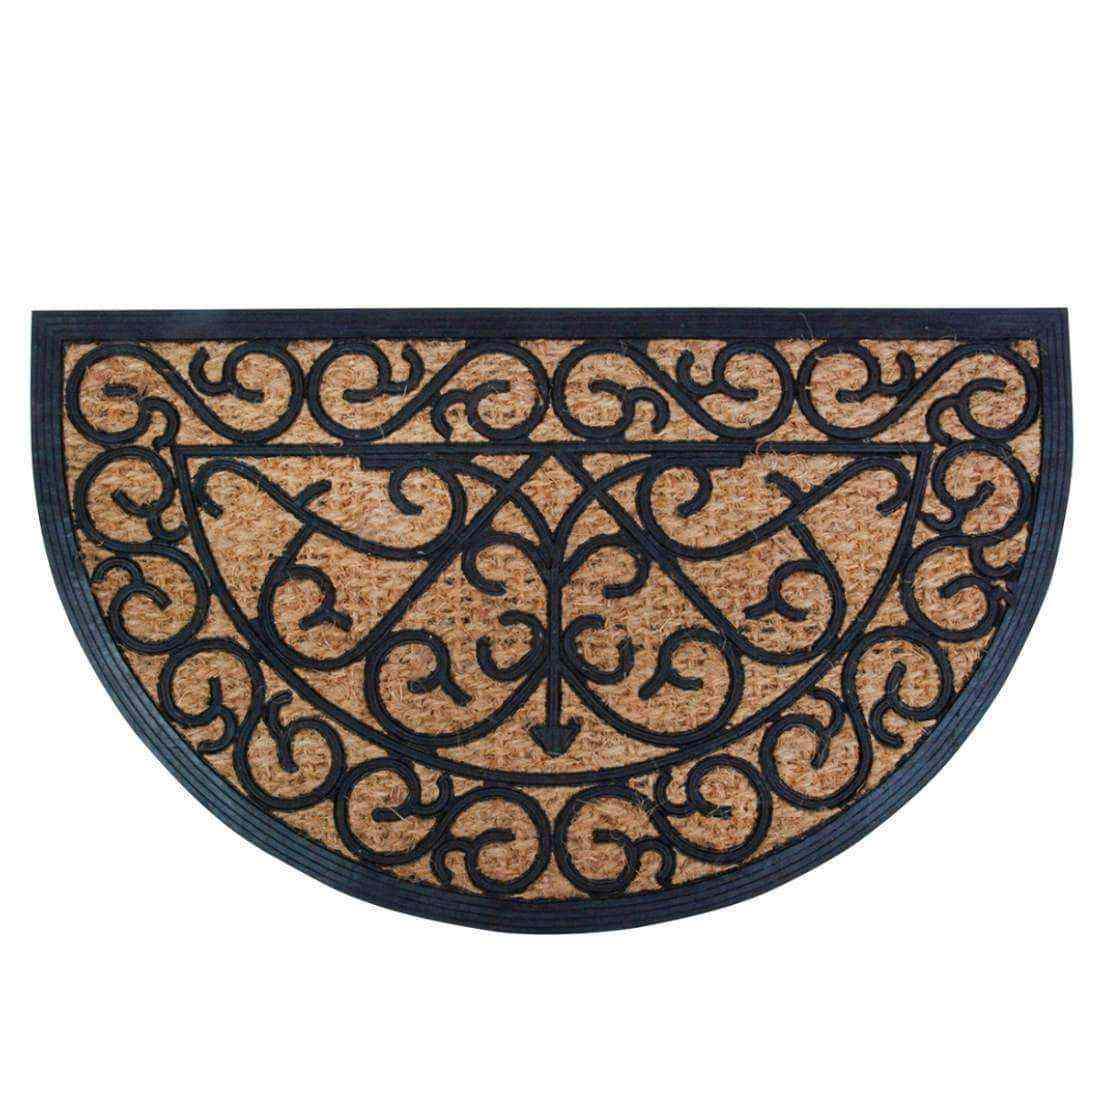 Victorian Styled Rubber & Coir Doormat - The Farthing